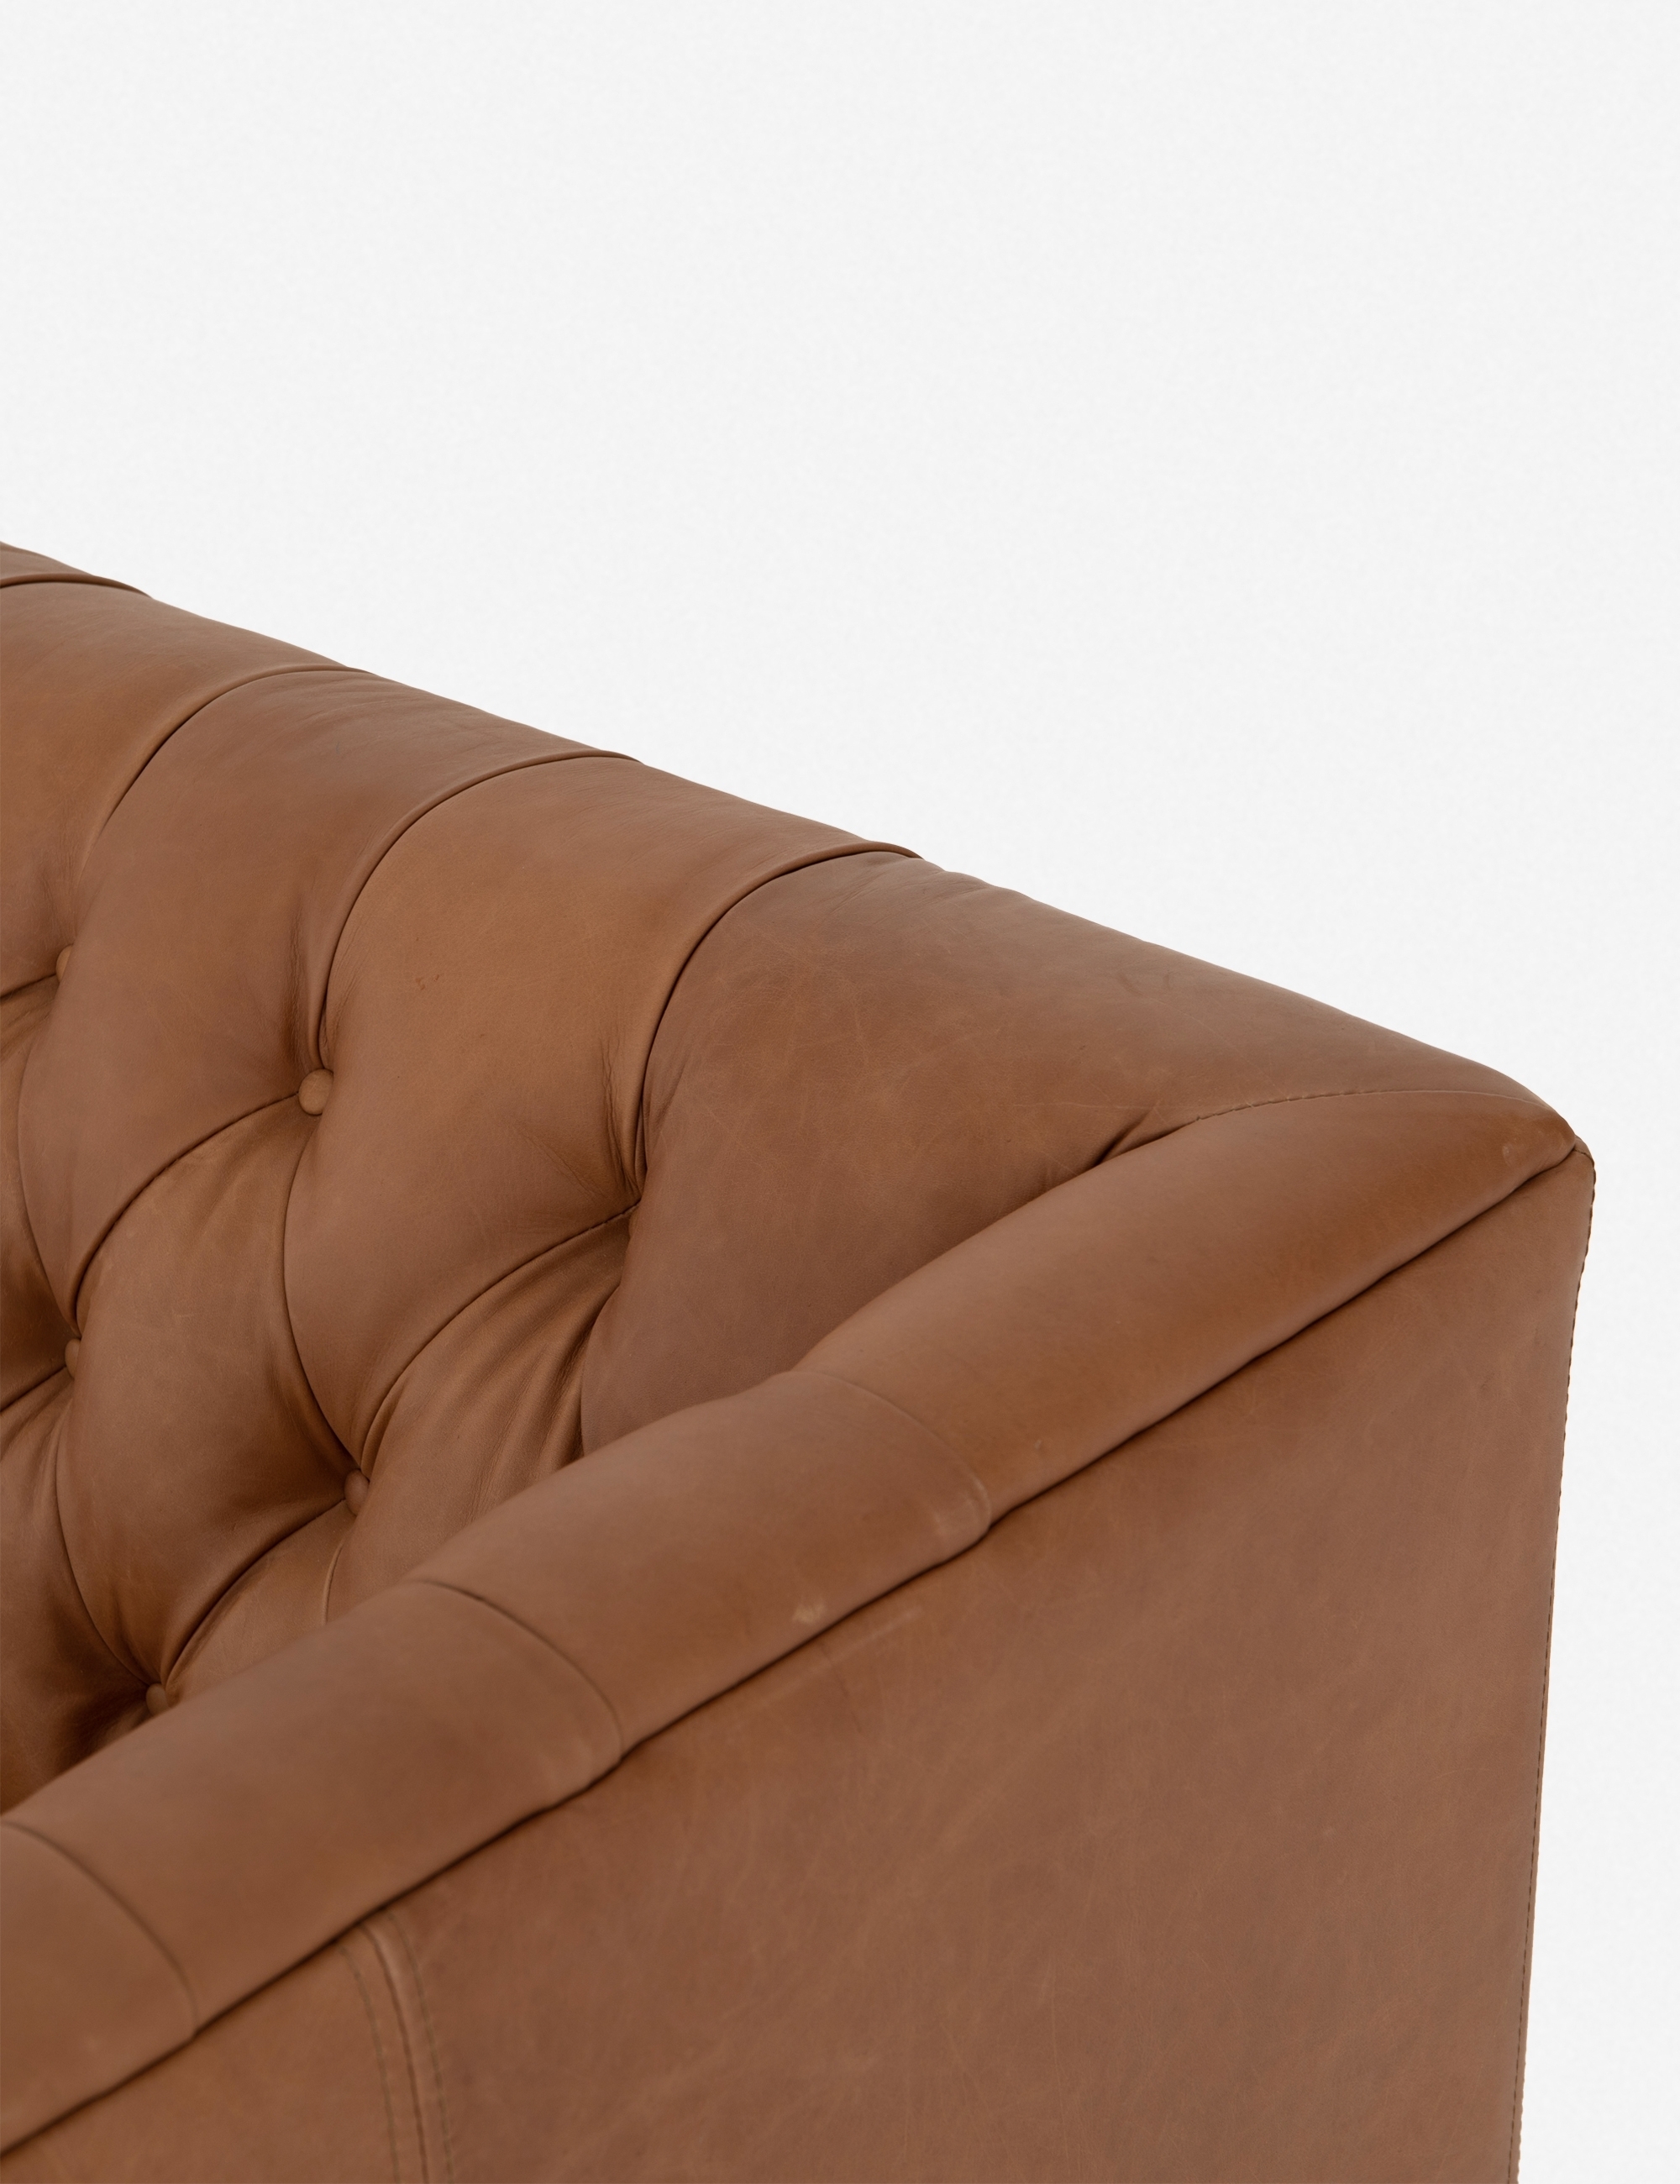 Breanne Leather Sofa, Camel, Small - Image 5